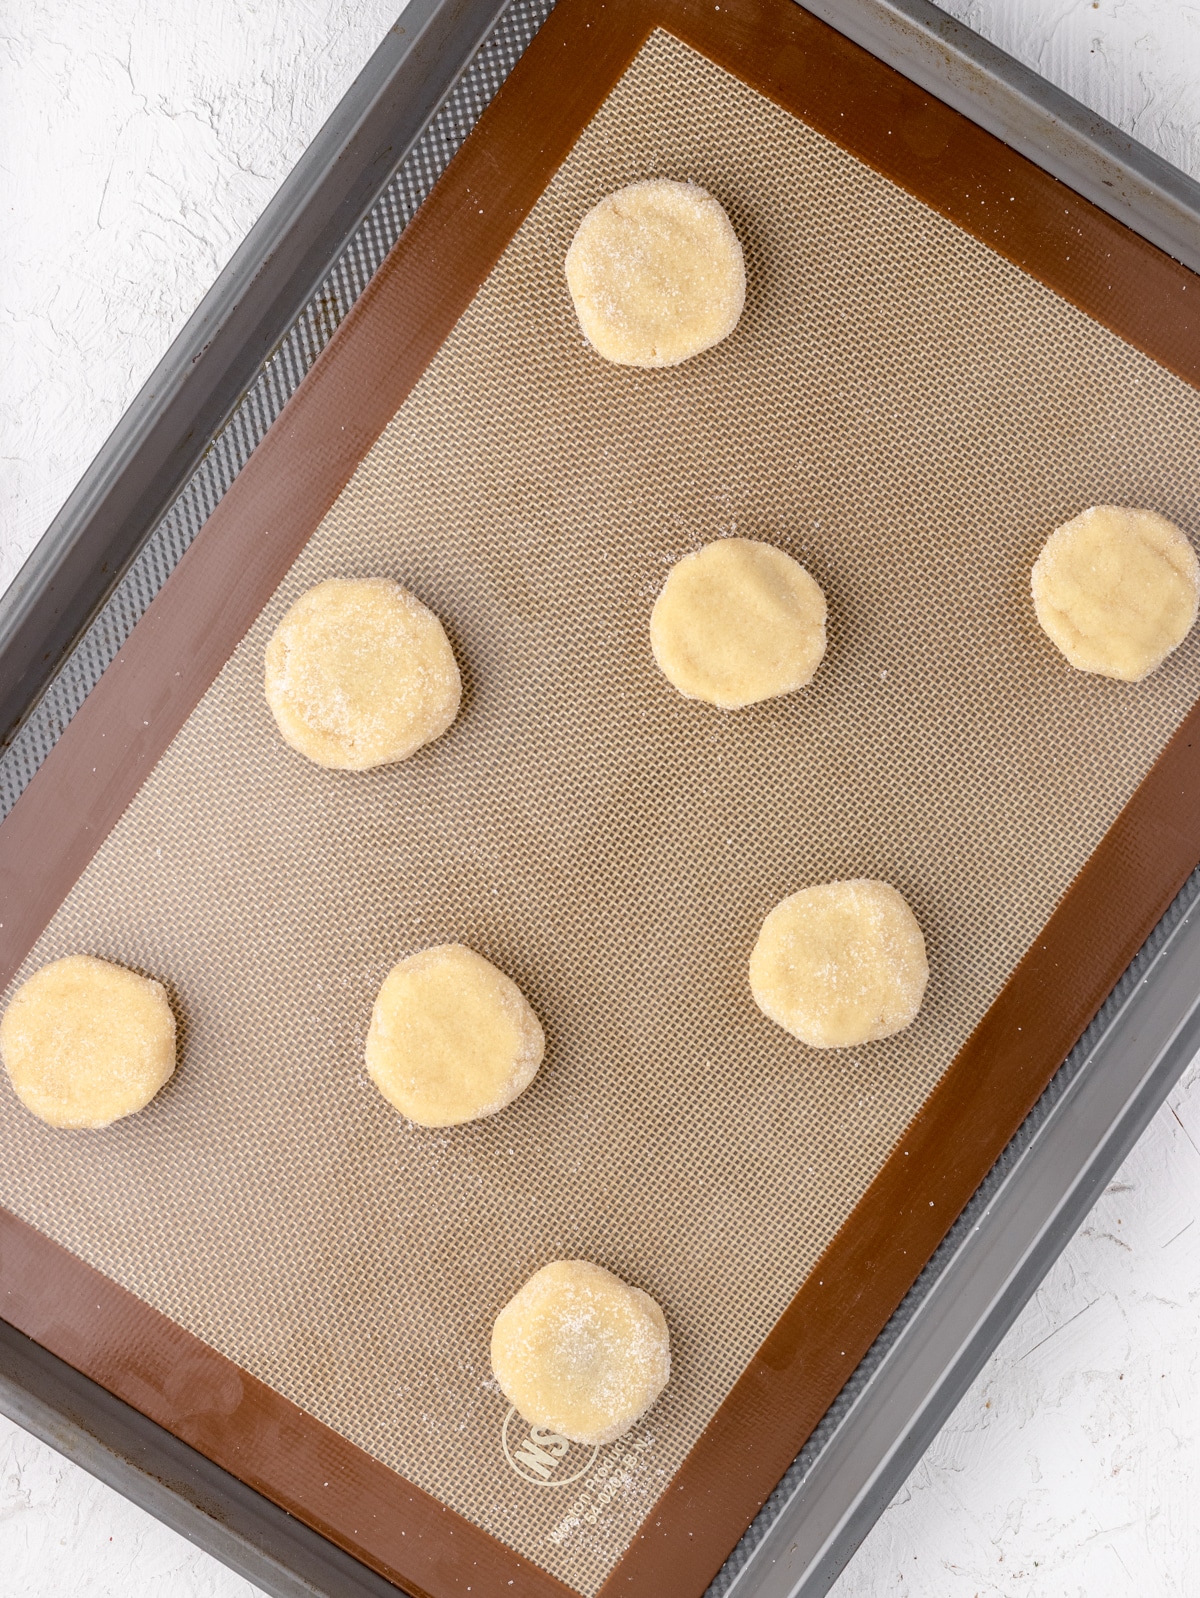 Cookies on cookie sheet ready to be baked.